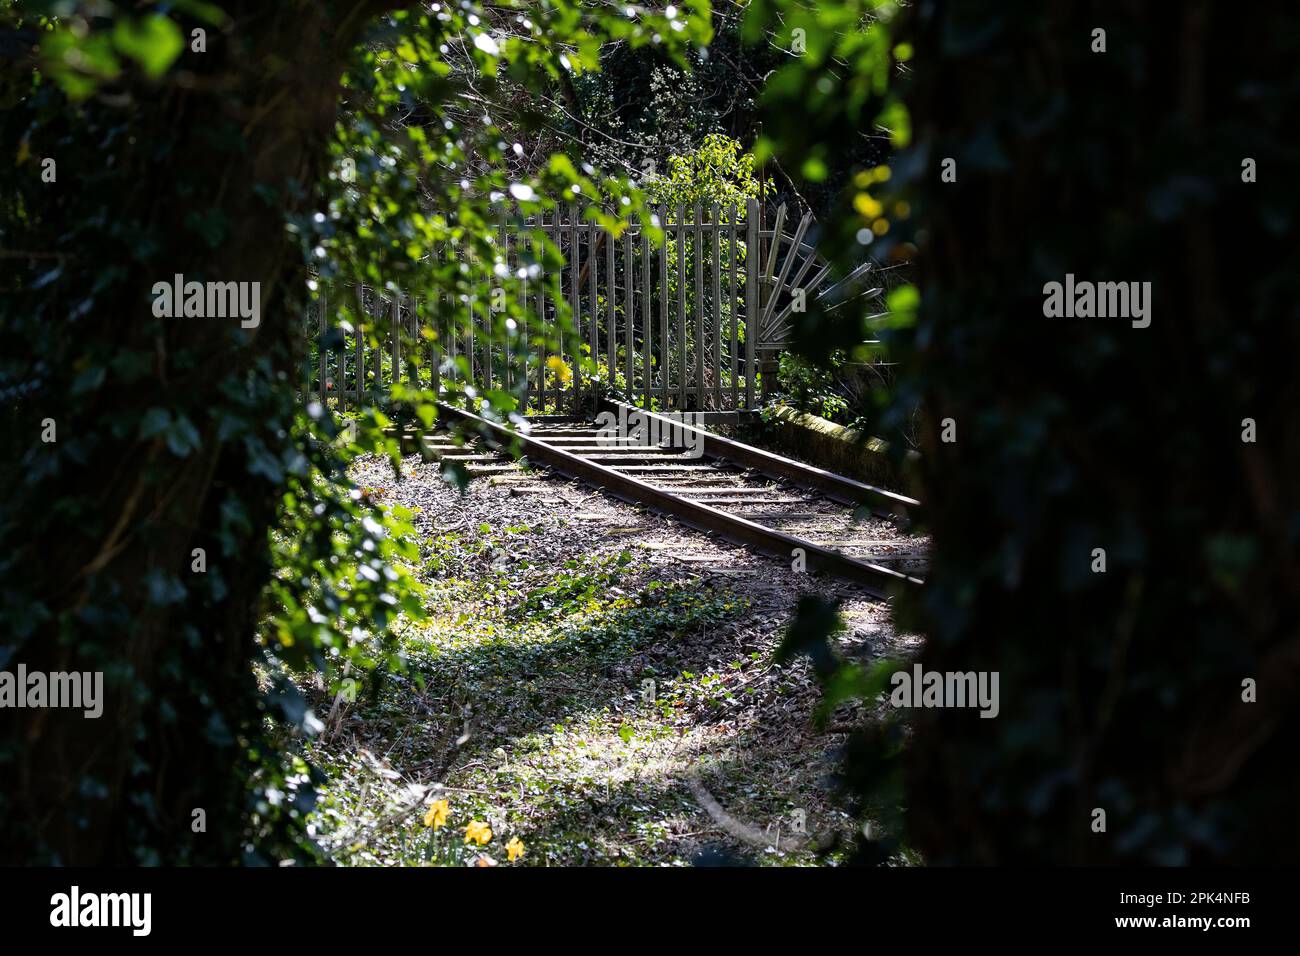 Steel railings erected across a disused railway line signify the end of the line at Llangefni in Anglesey, North Wales which closed in 1964 Stock Photo